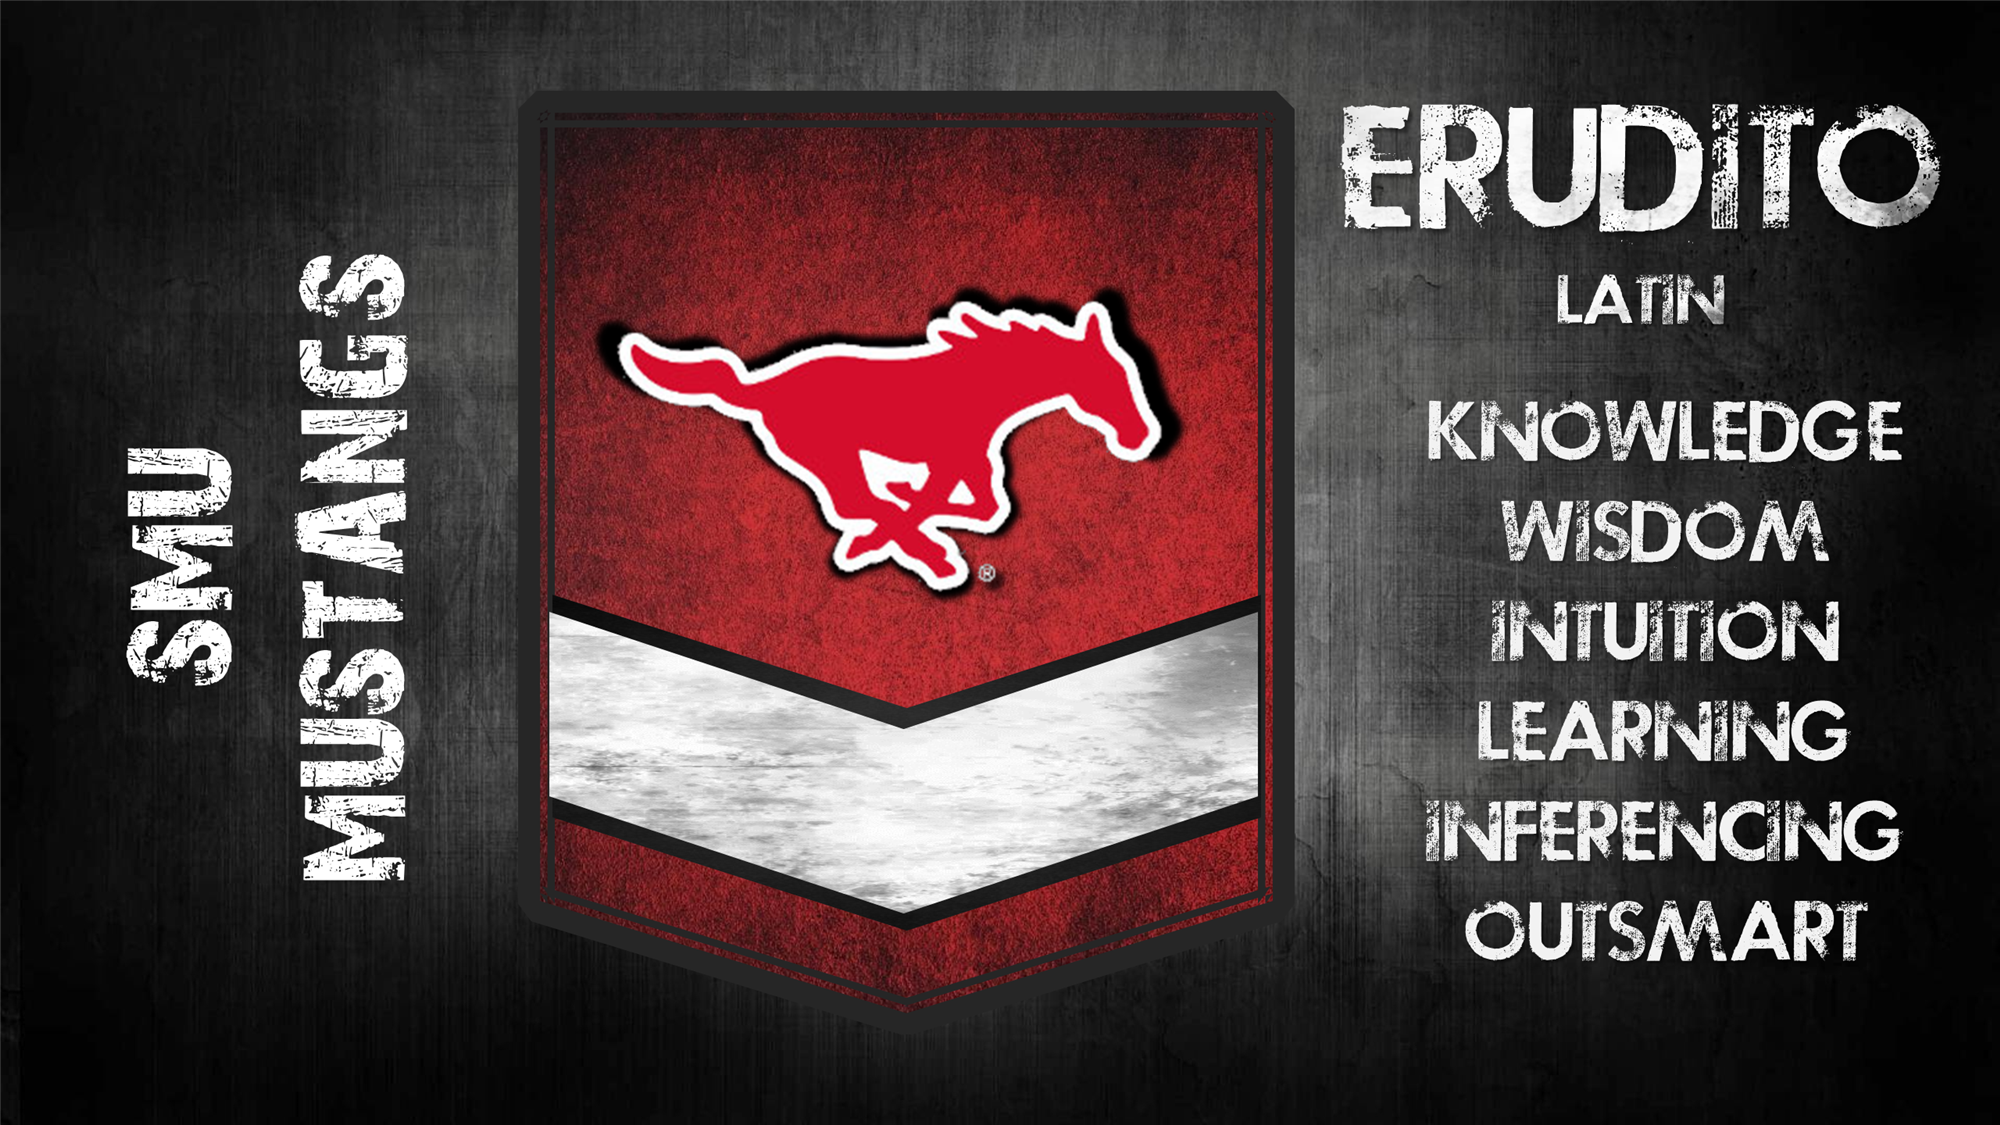 Erudtio (Latin) represents Knowledge, Wisdom, Intuition, Learning, Inferencing, and Outsmarting.